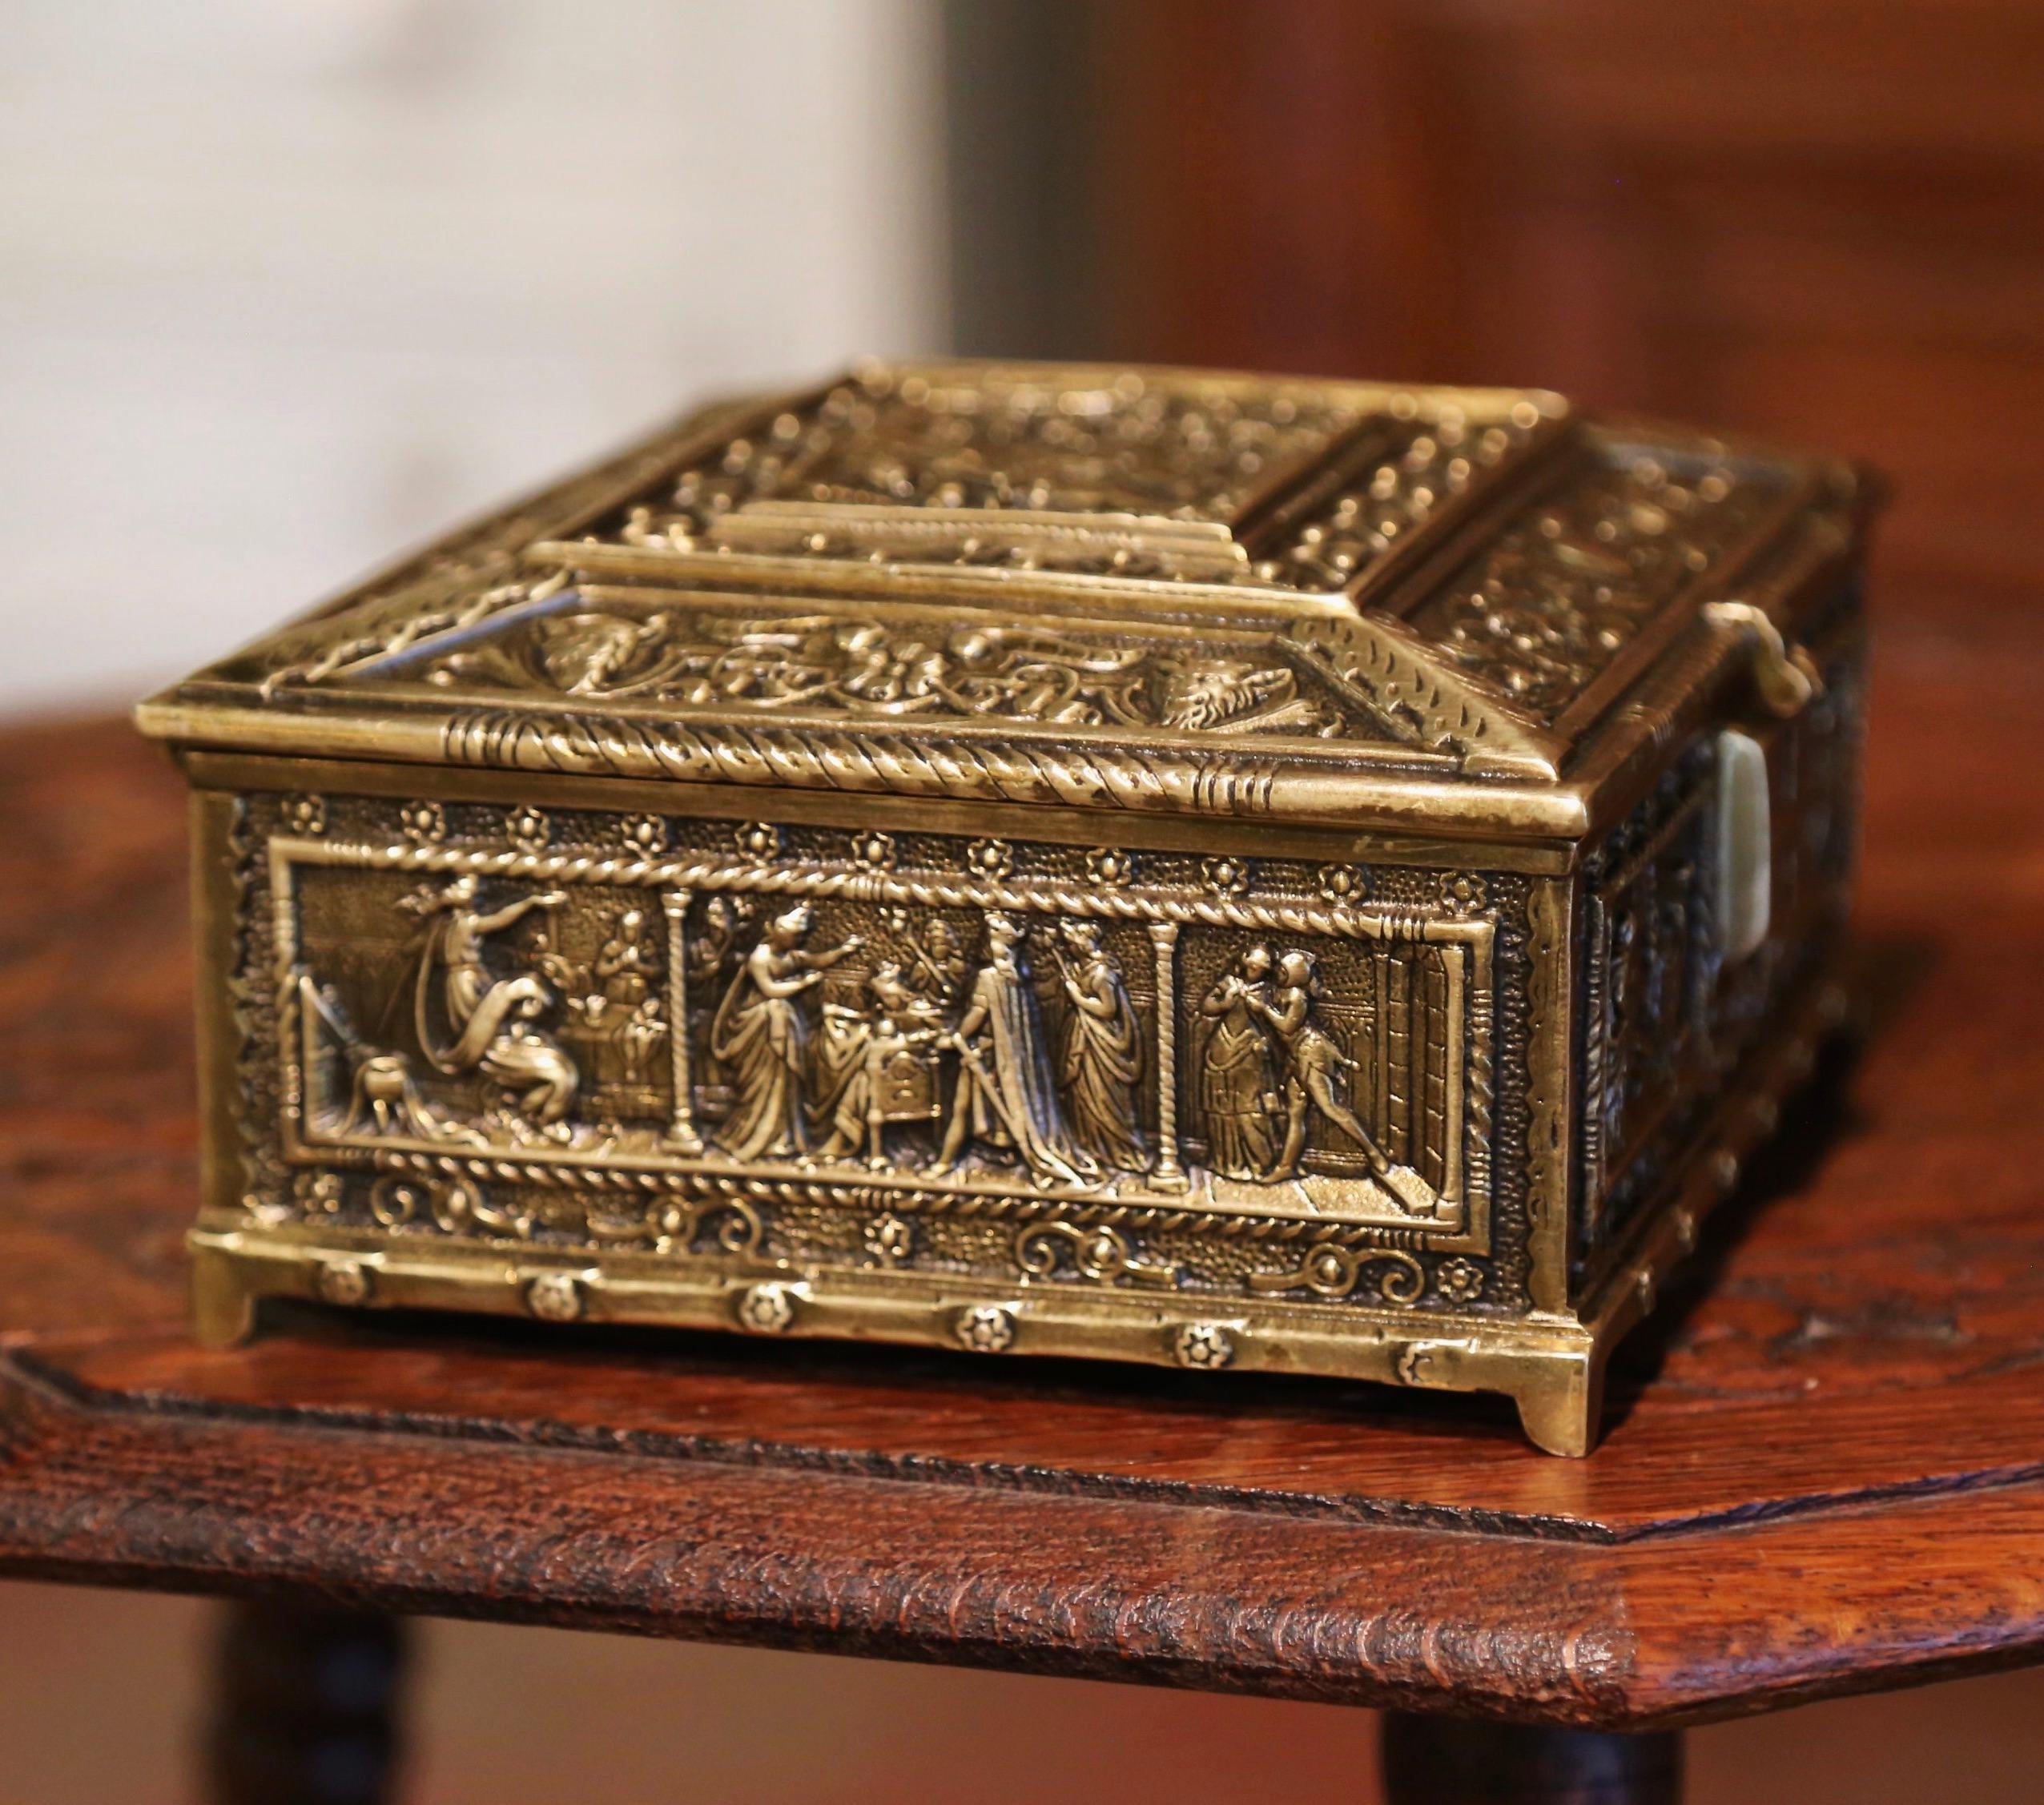 19th Century 19th-Century Belgian Patinated Bronze Jewelry Box with Medieval Court Decor